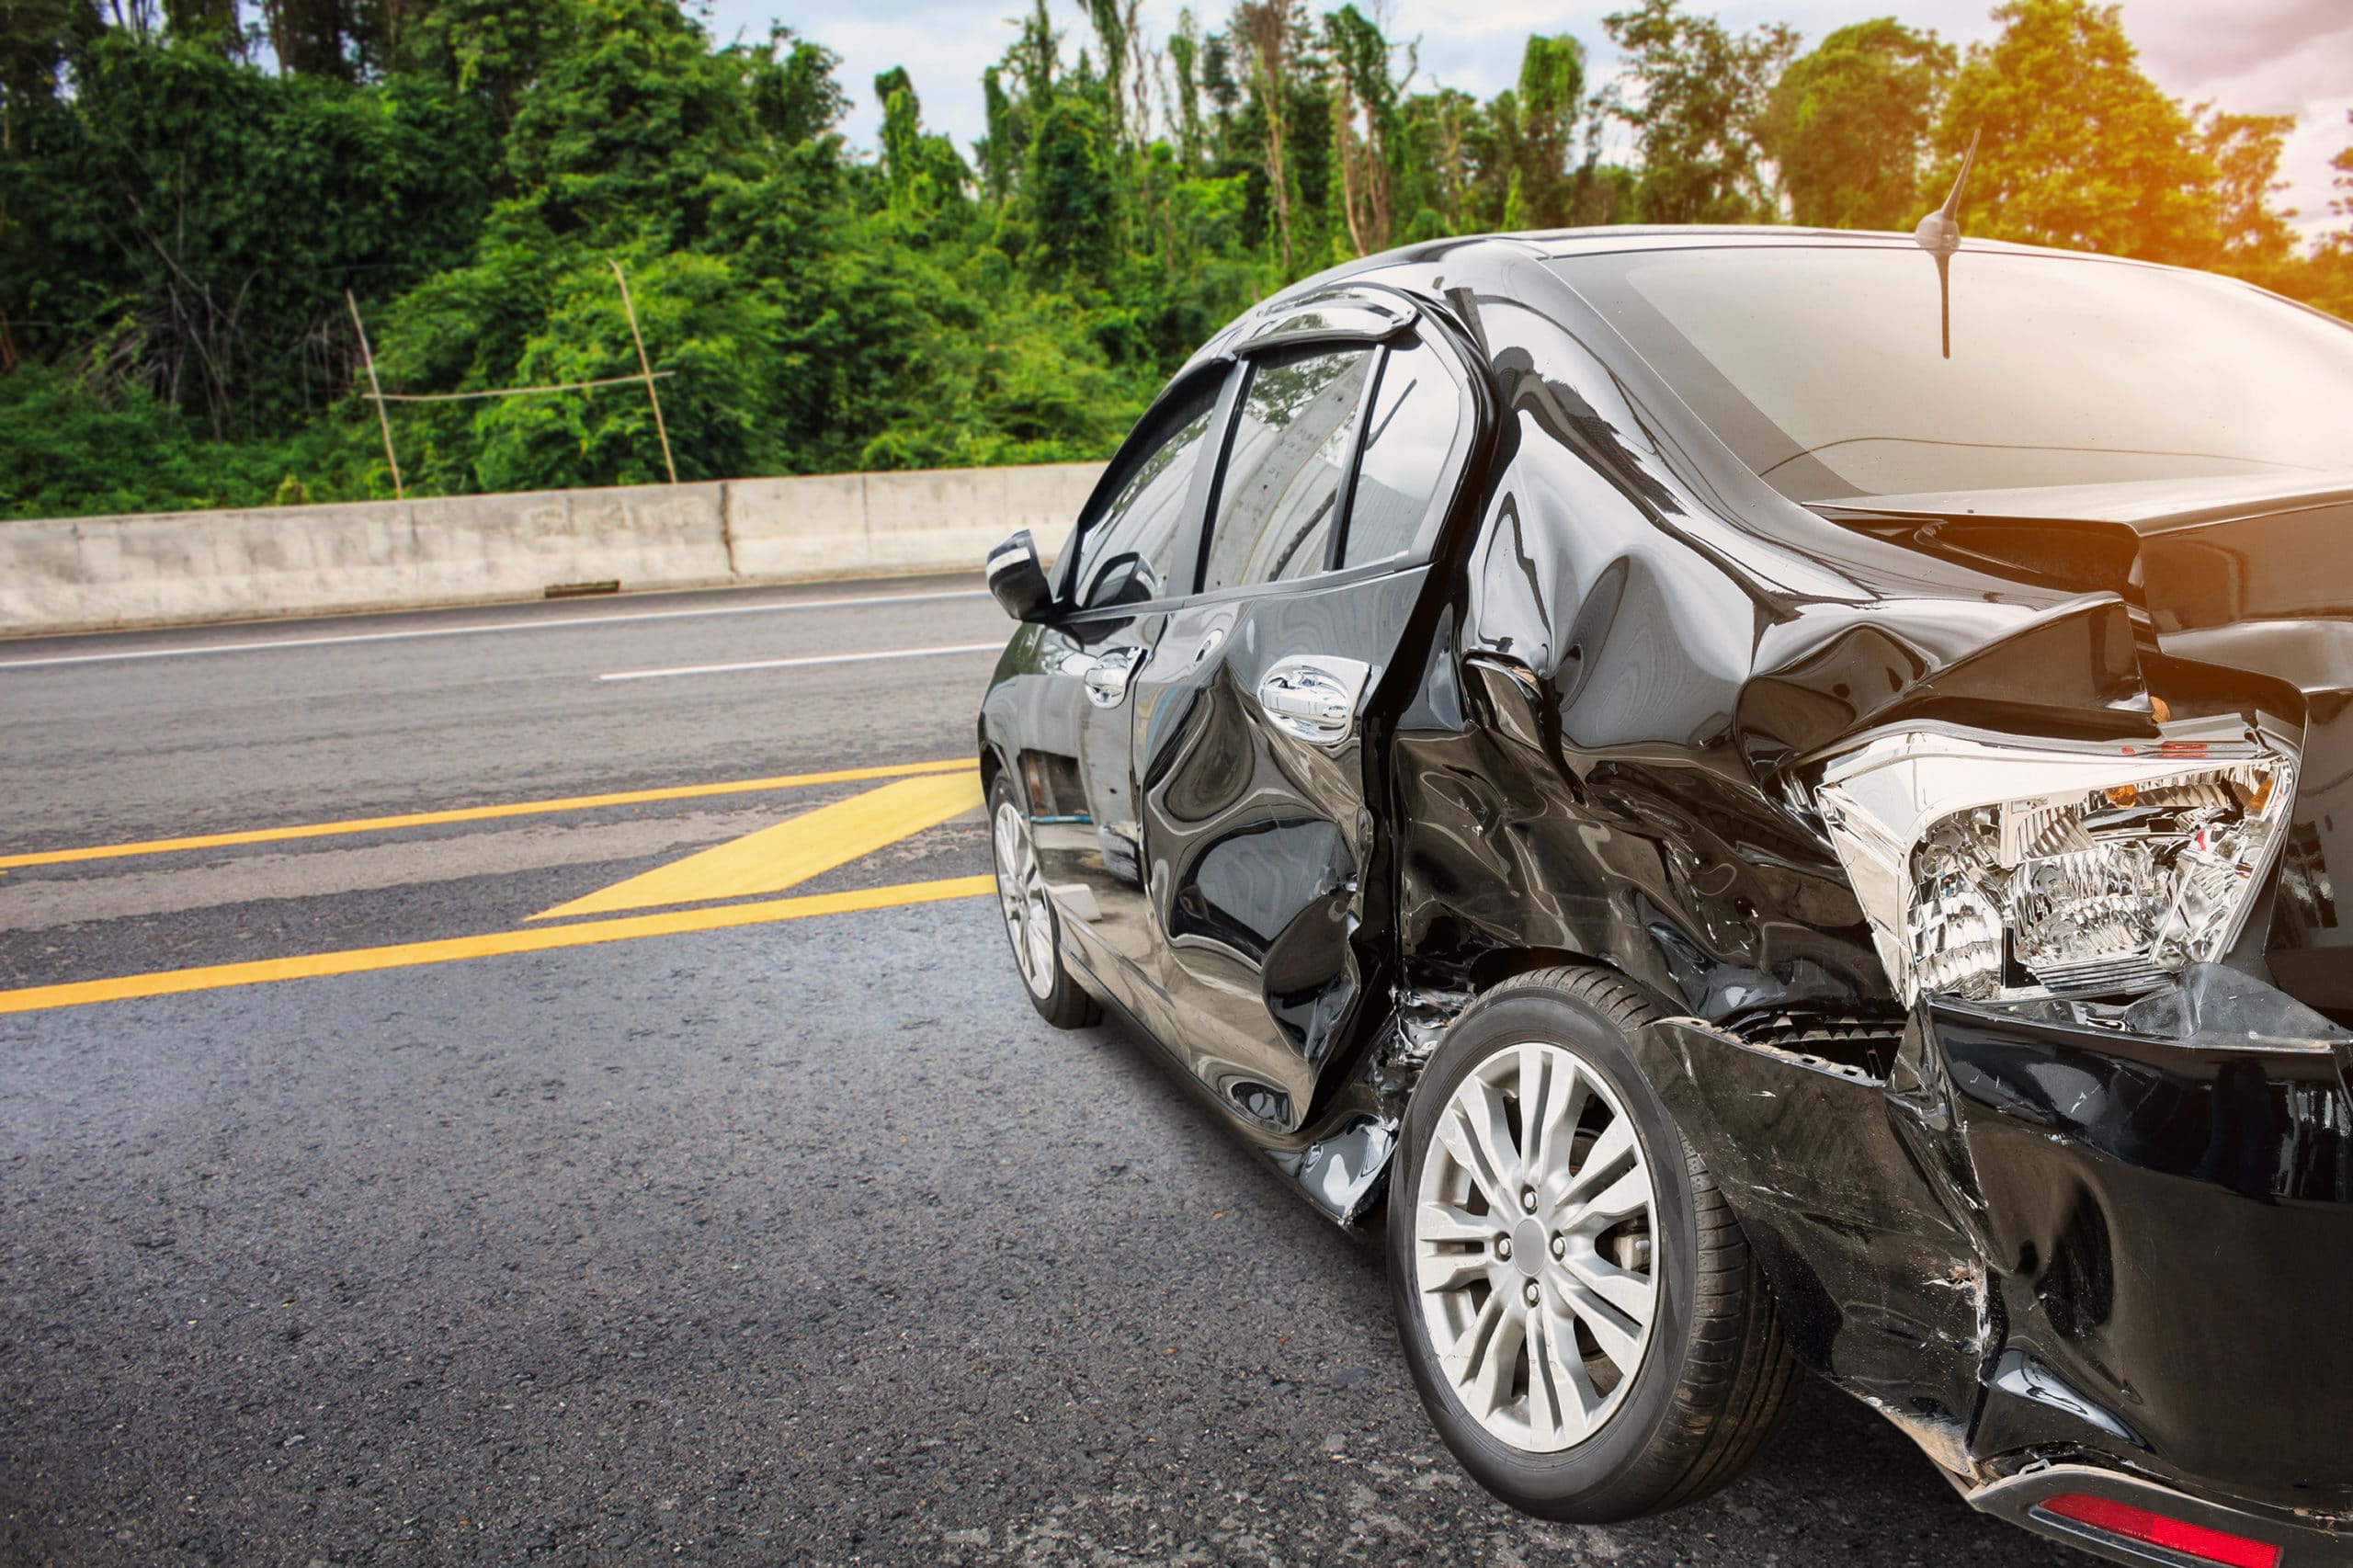 Car Crash Accident On The Road | Motor Vehicle Accident Lawyers in NYC | Gash & Associates, P.C